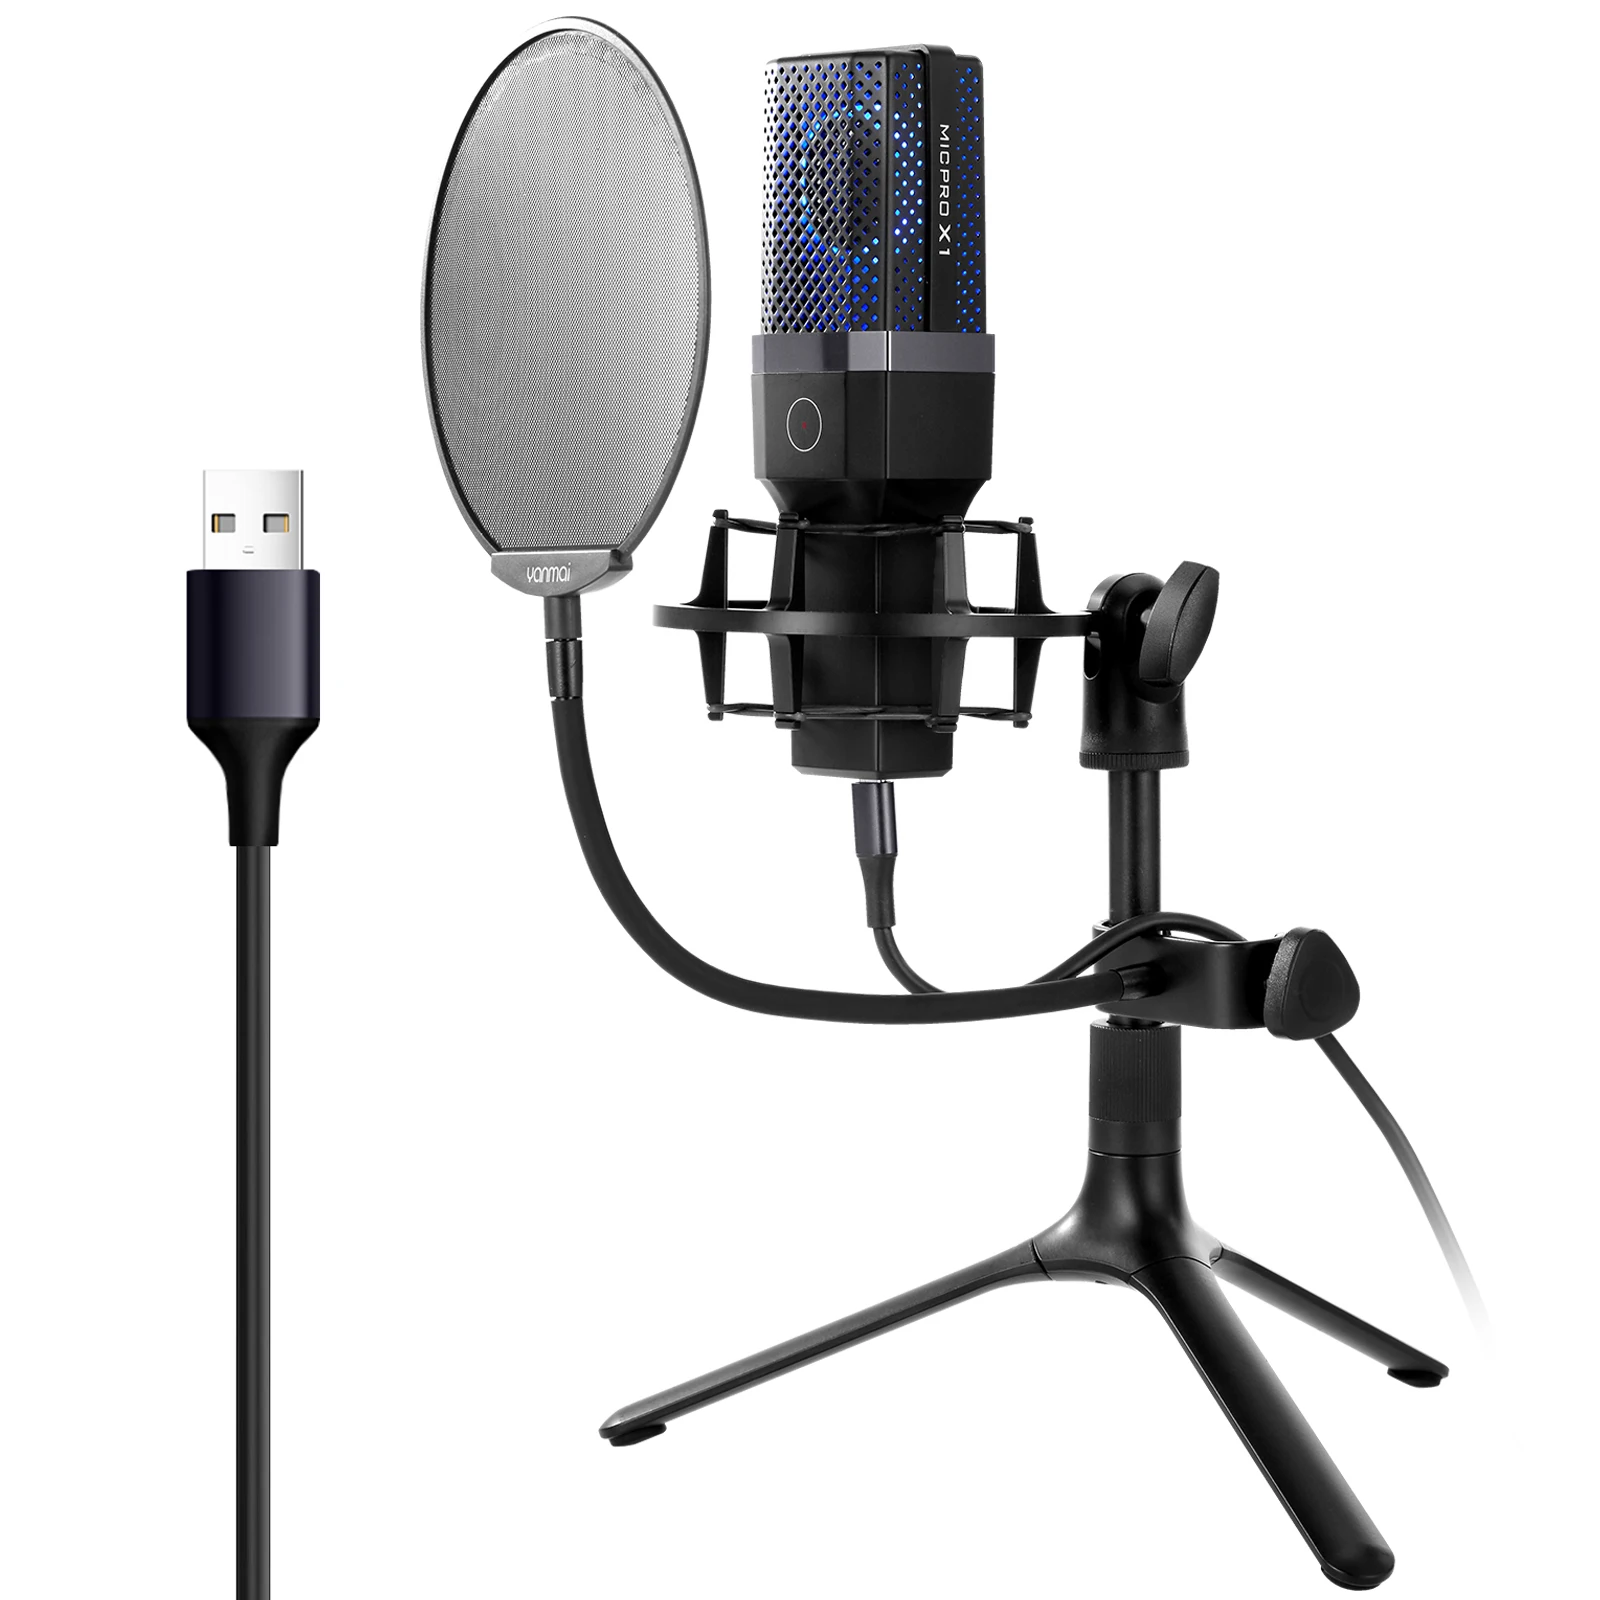 

USB Condenser Microphone Set With Tripod Stand Filter For Singing Podcasting Voice Recording